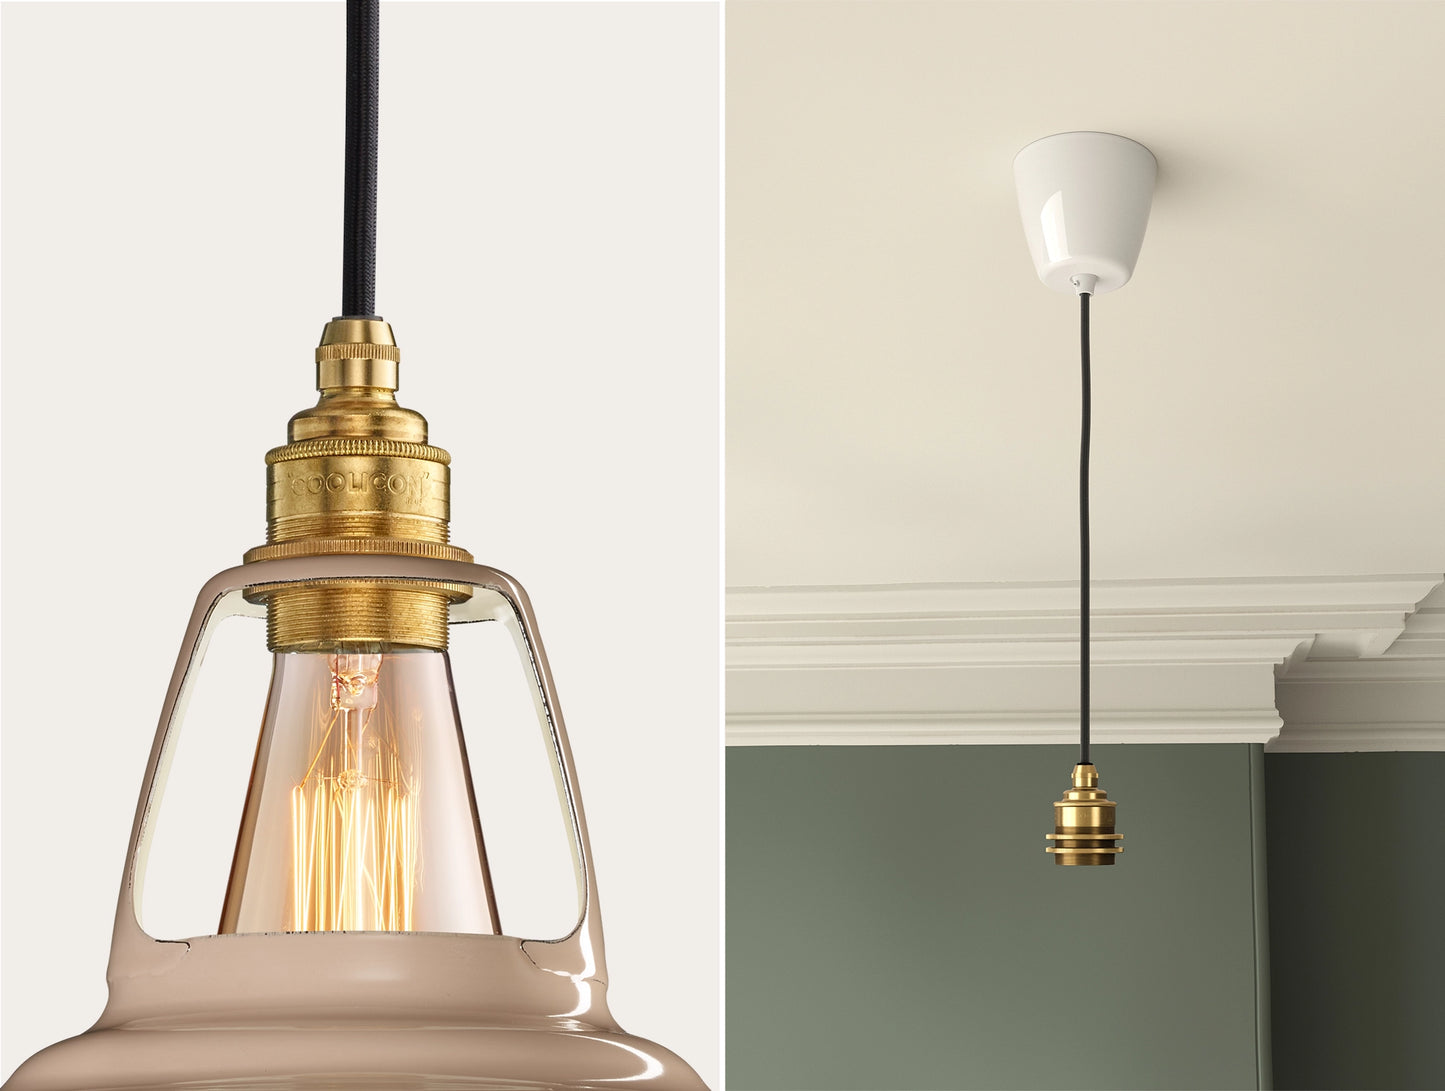 Close up of an E27 Signature Brass suspension set on a Latte Brown lampshade on the left. On the right, an E27 Brass pendant set is hanging from the ceiling